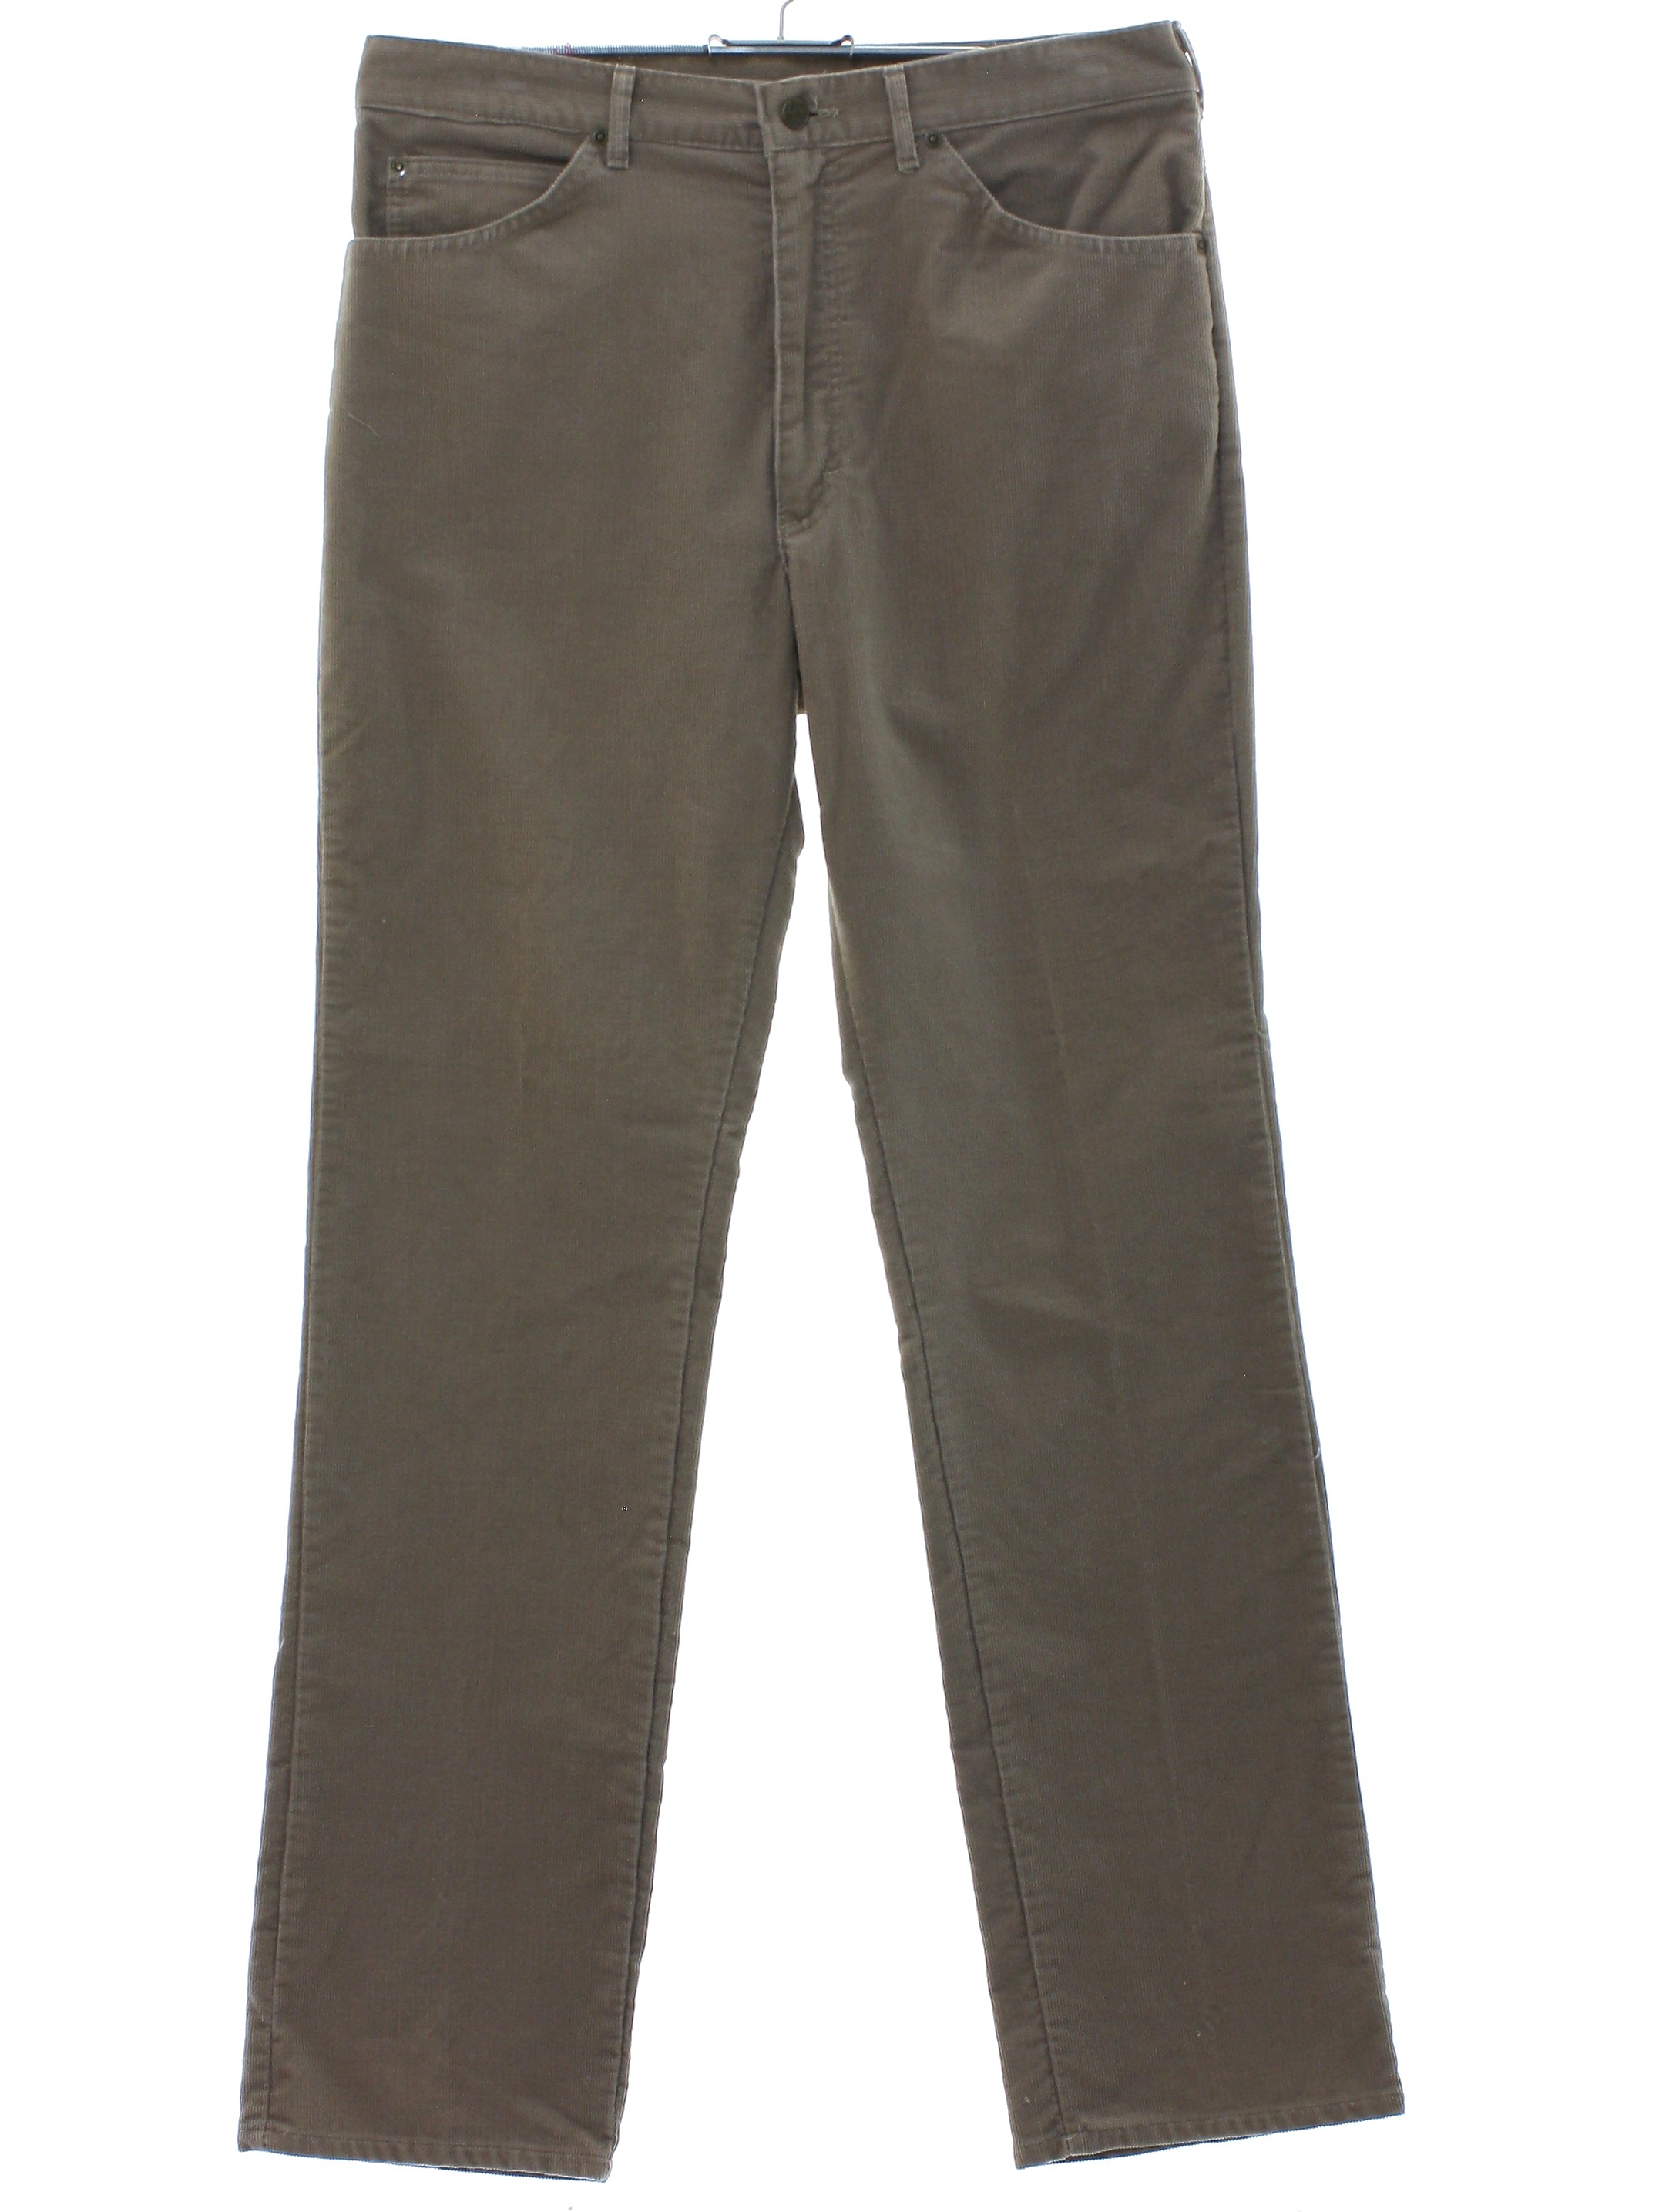 1970's Retro Pants: 70s -Lee, Made in USA, Union Label- Mens tan ...